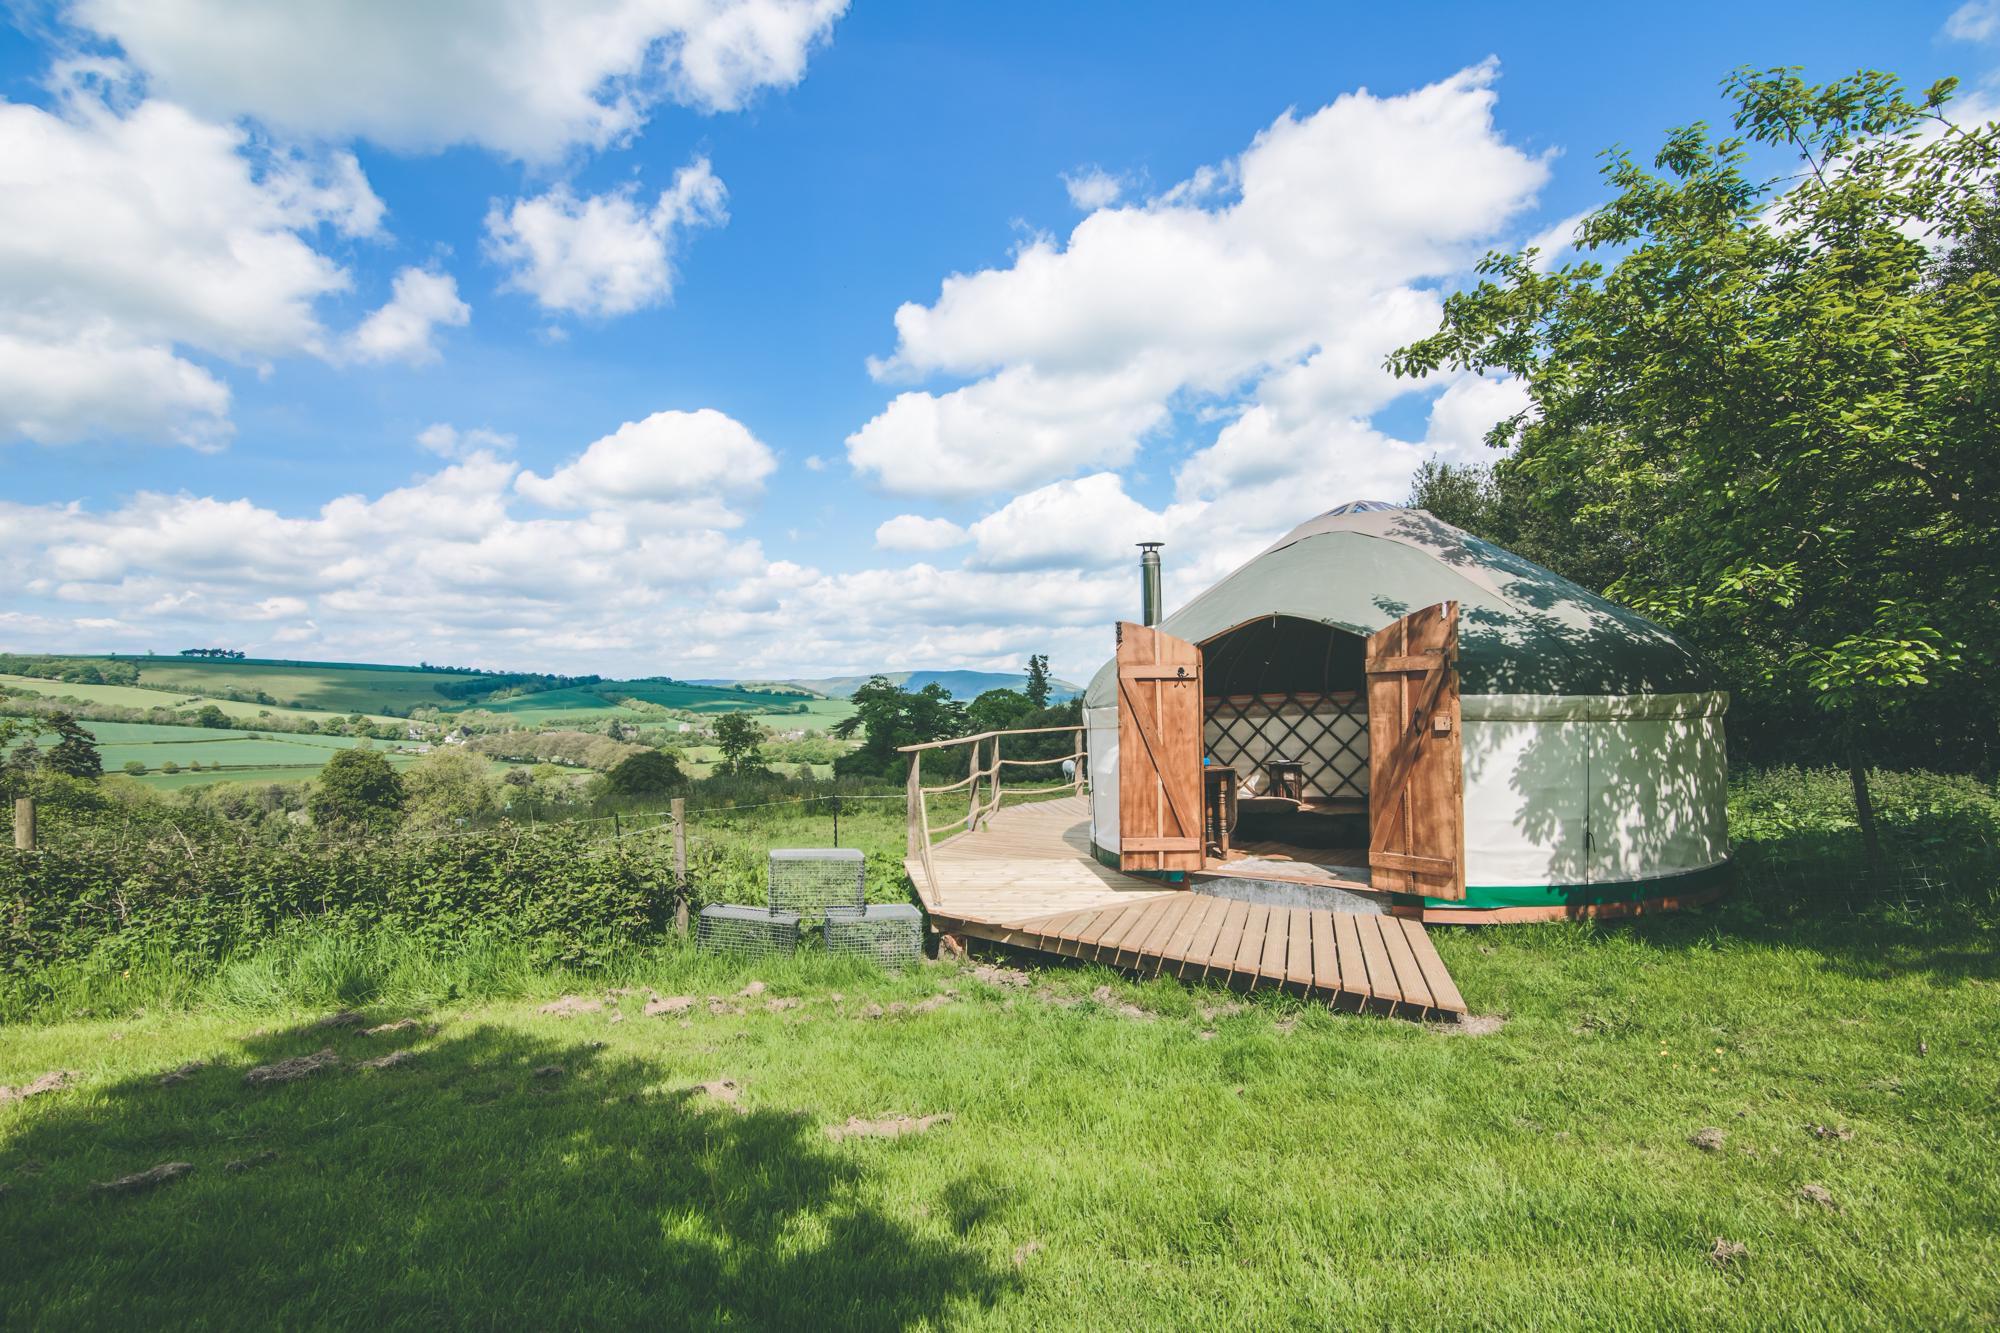 Hotels, Cottages, B&Bs & Glamping in Shropshire